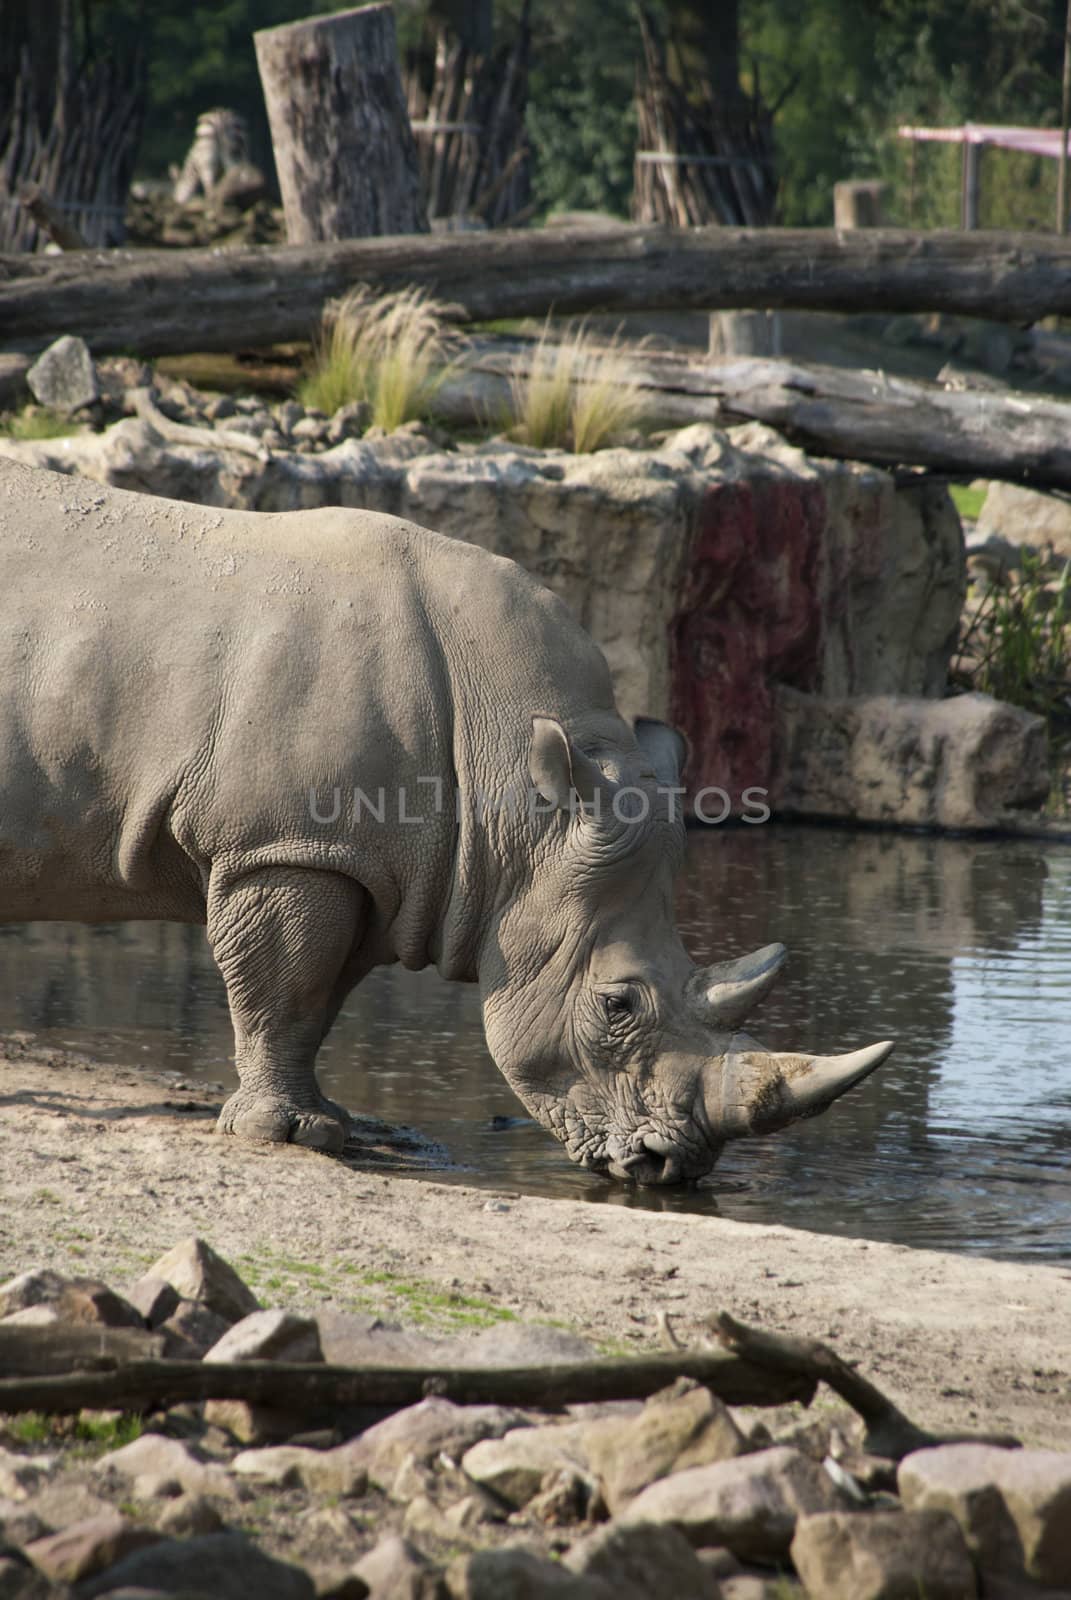 Rhinoceros drinking water from the lake